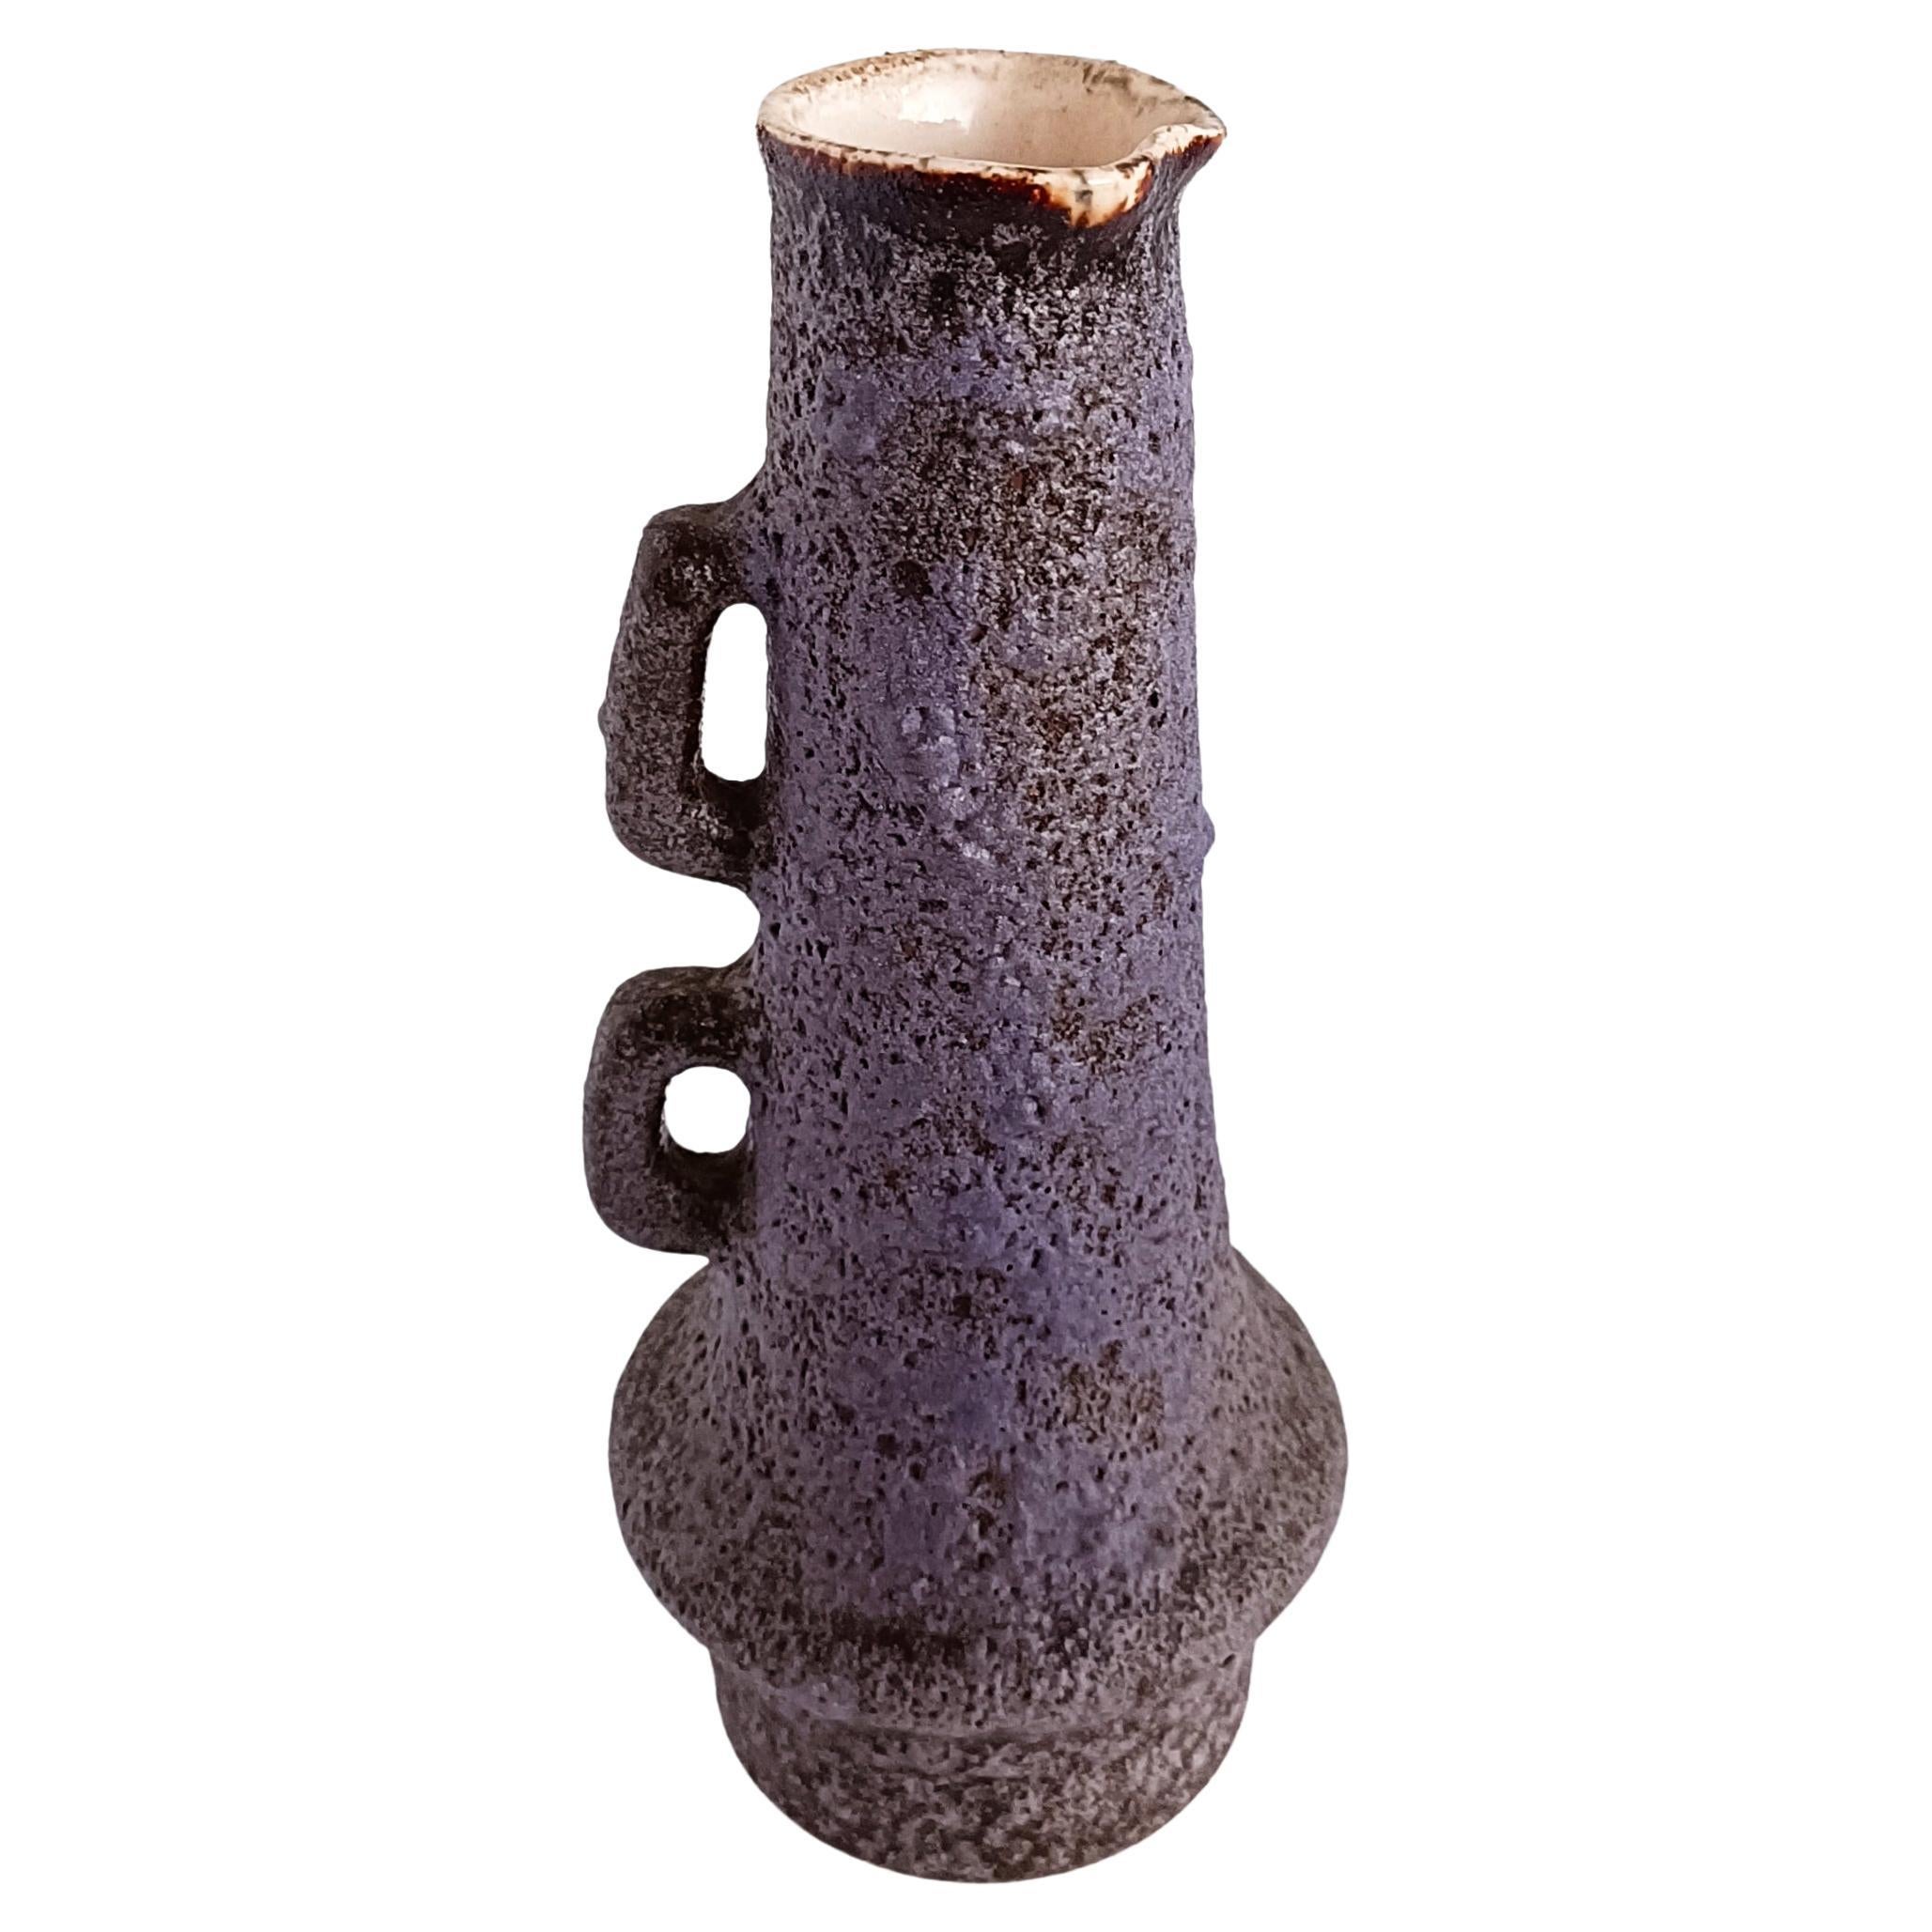 A beautiful ceramic jug featuring the lilac color Fata Lava glazing so characteristic of the Vest Ceramic studio production circa the 1960s. Marius Van Woerden focused on this type of brutalist ceramics, creating organic shapes and raw fat lava